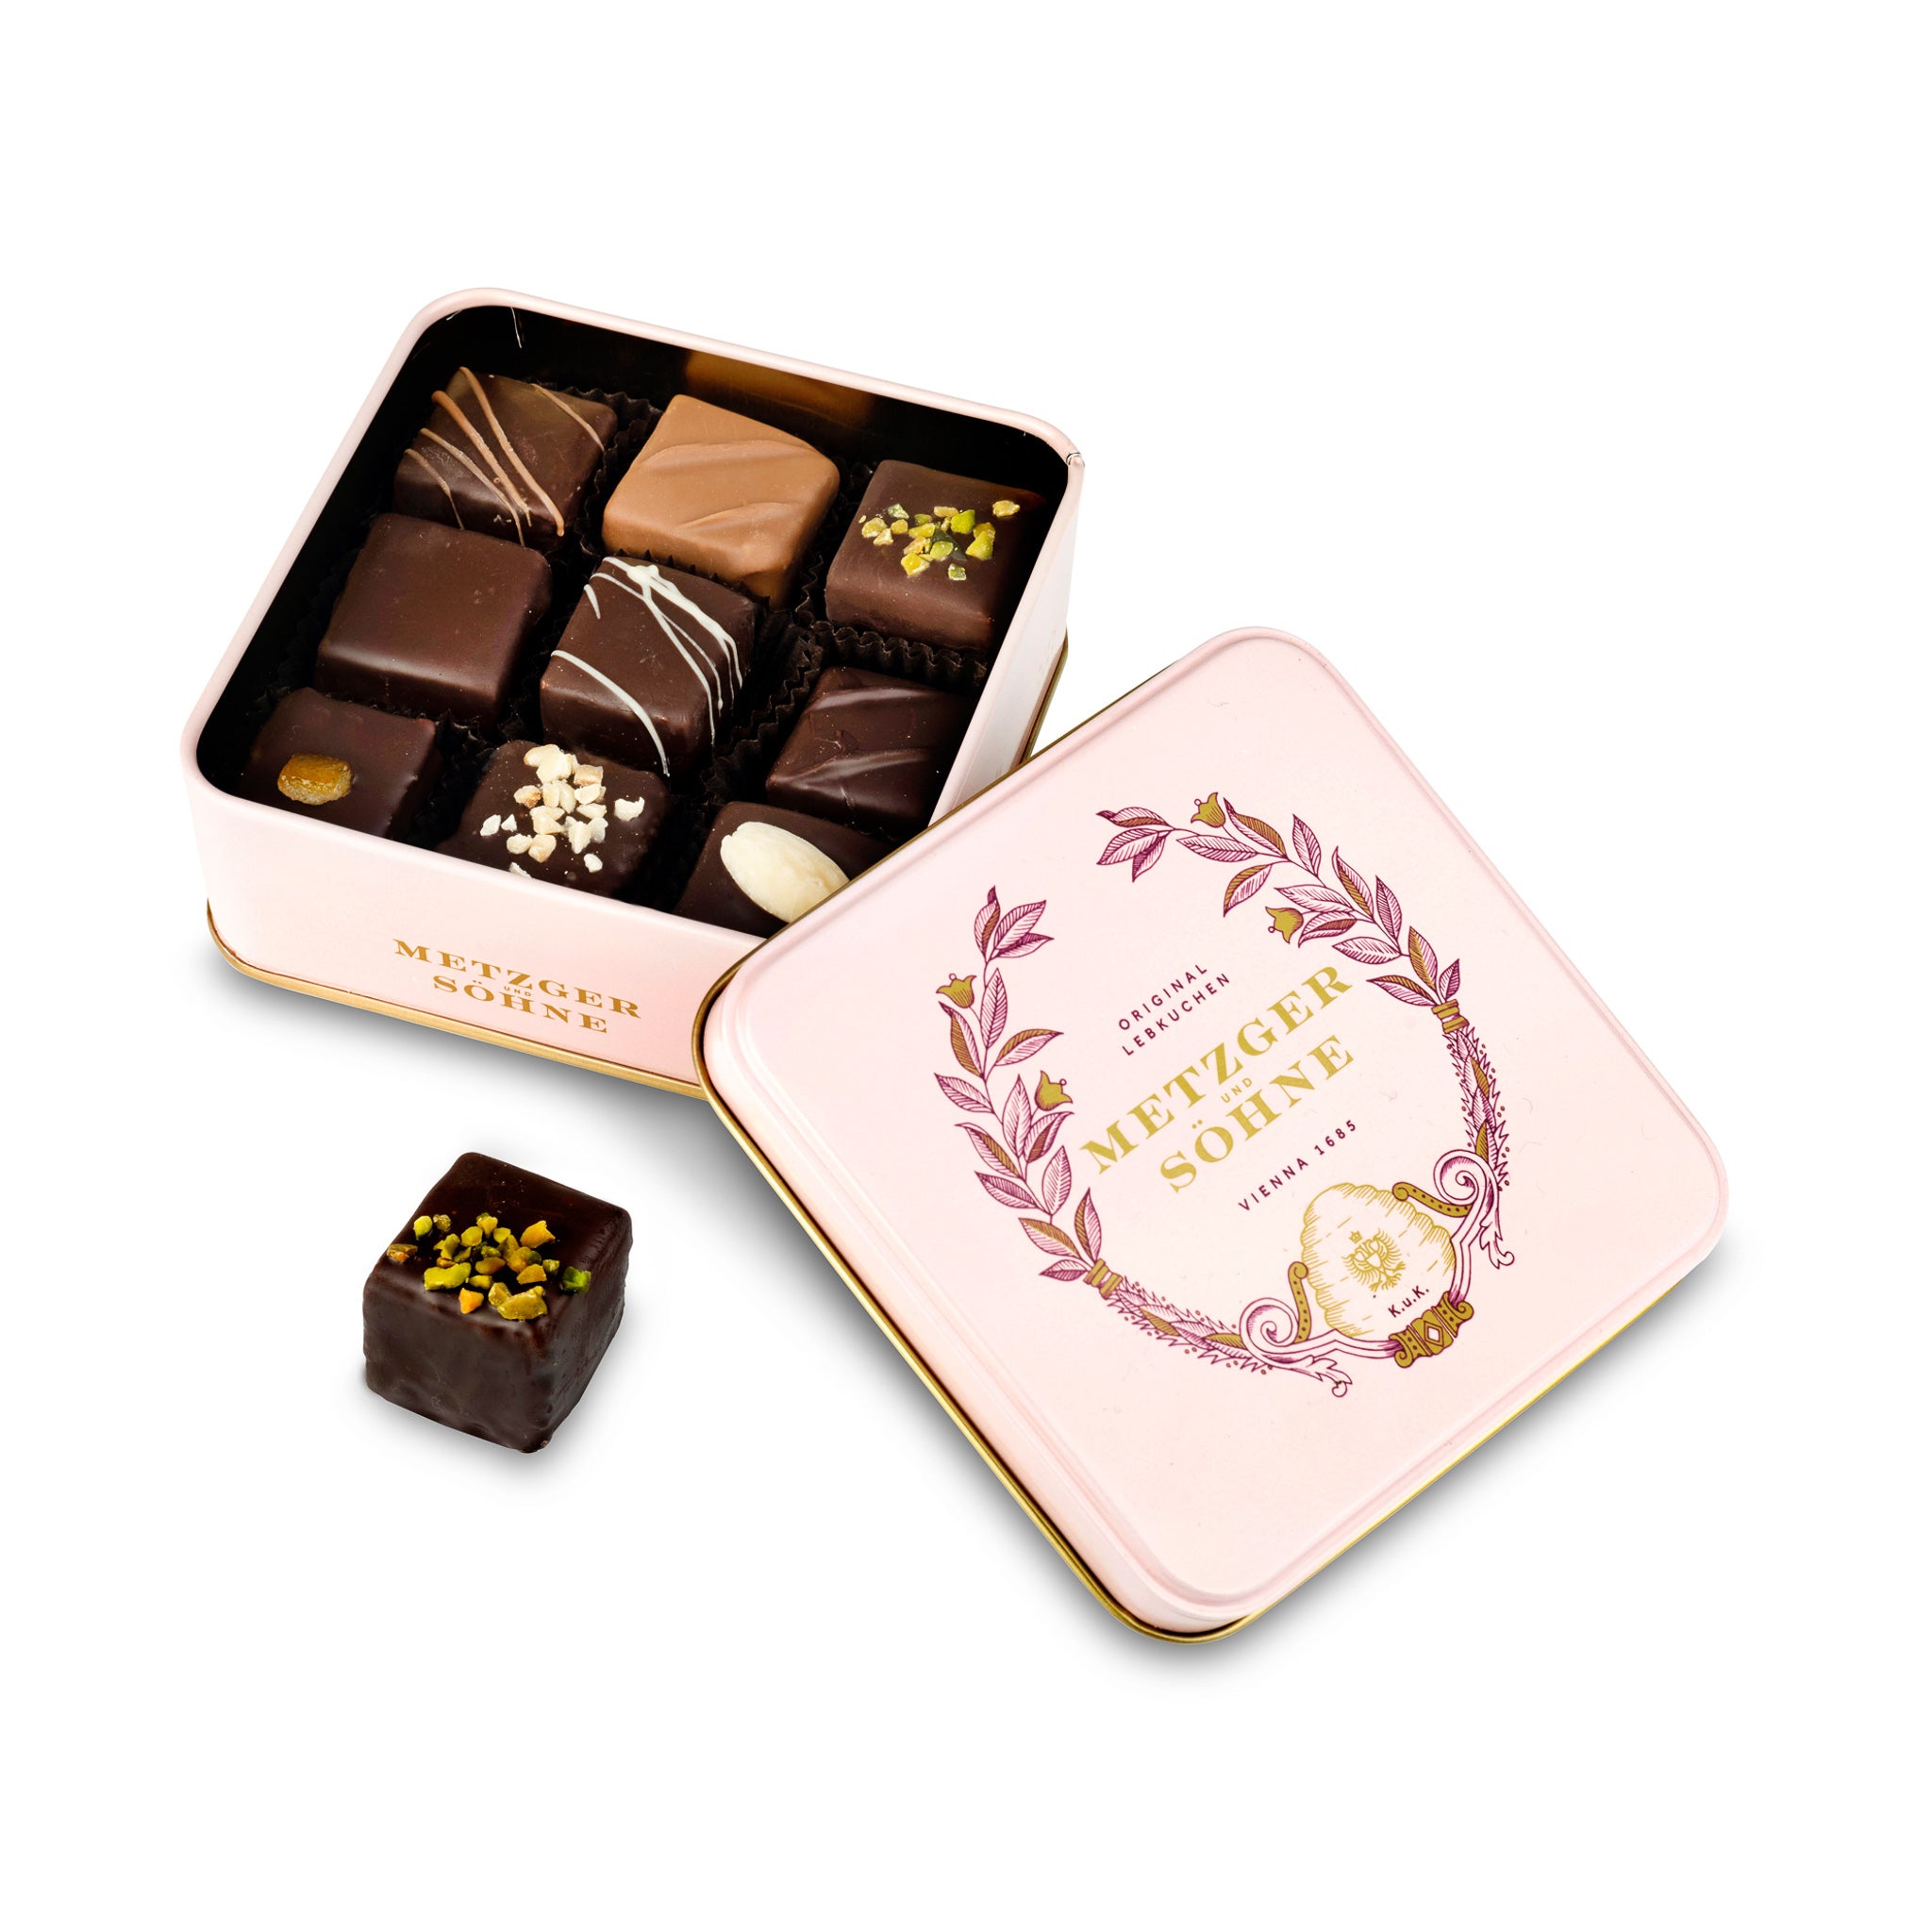 A perfect gift for a special occasion. Metzger's signature luxury tin in delicate pink, filled with with 9 delectable Lebkuchen chocolate pralines. Each praline is layered with Lebkuchen 'honey cake' and filled with marzipan, nuts or fruit jams and jellies, encased in rich chocolate. Suitable for vegetarians.